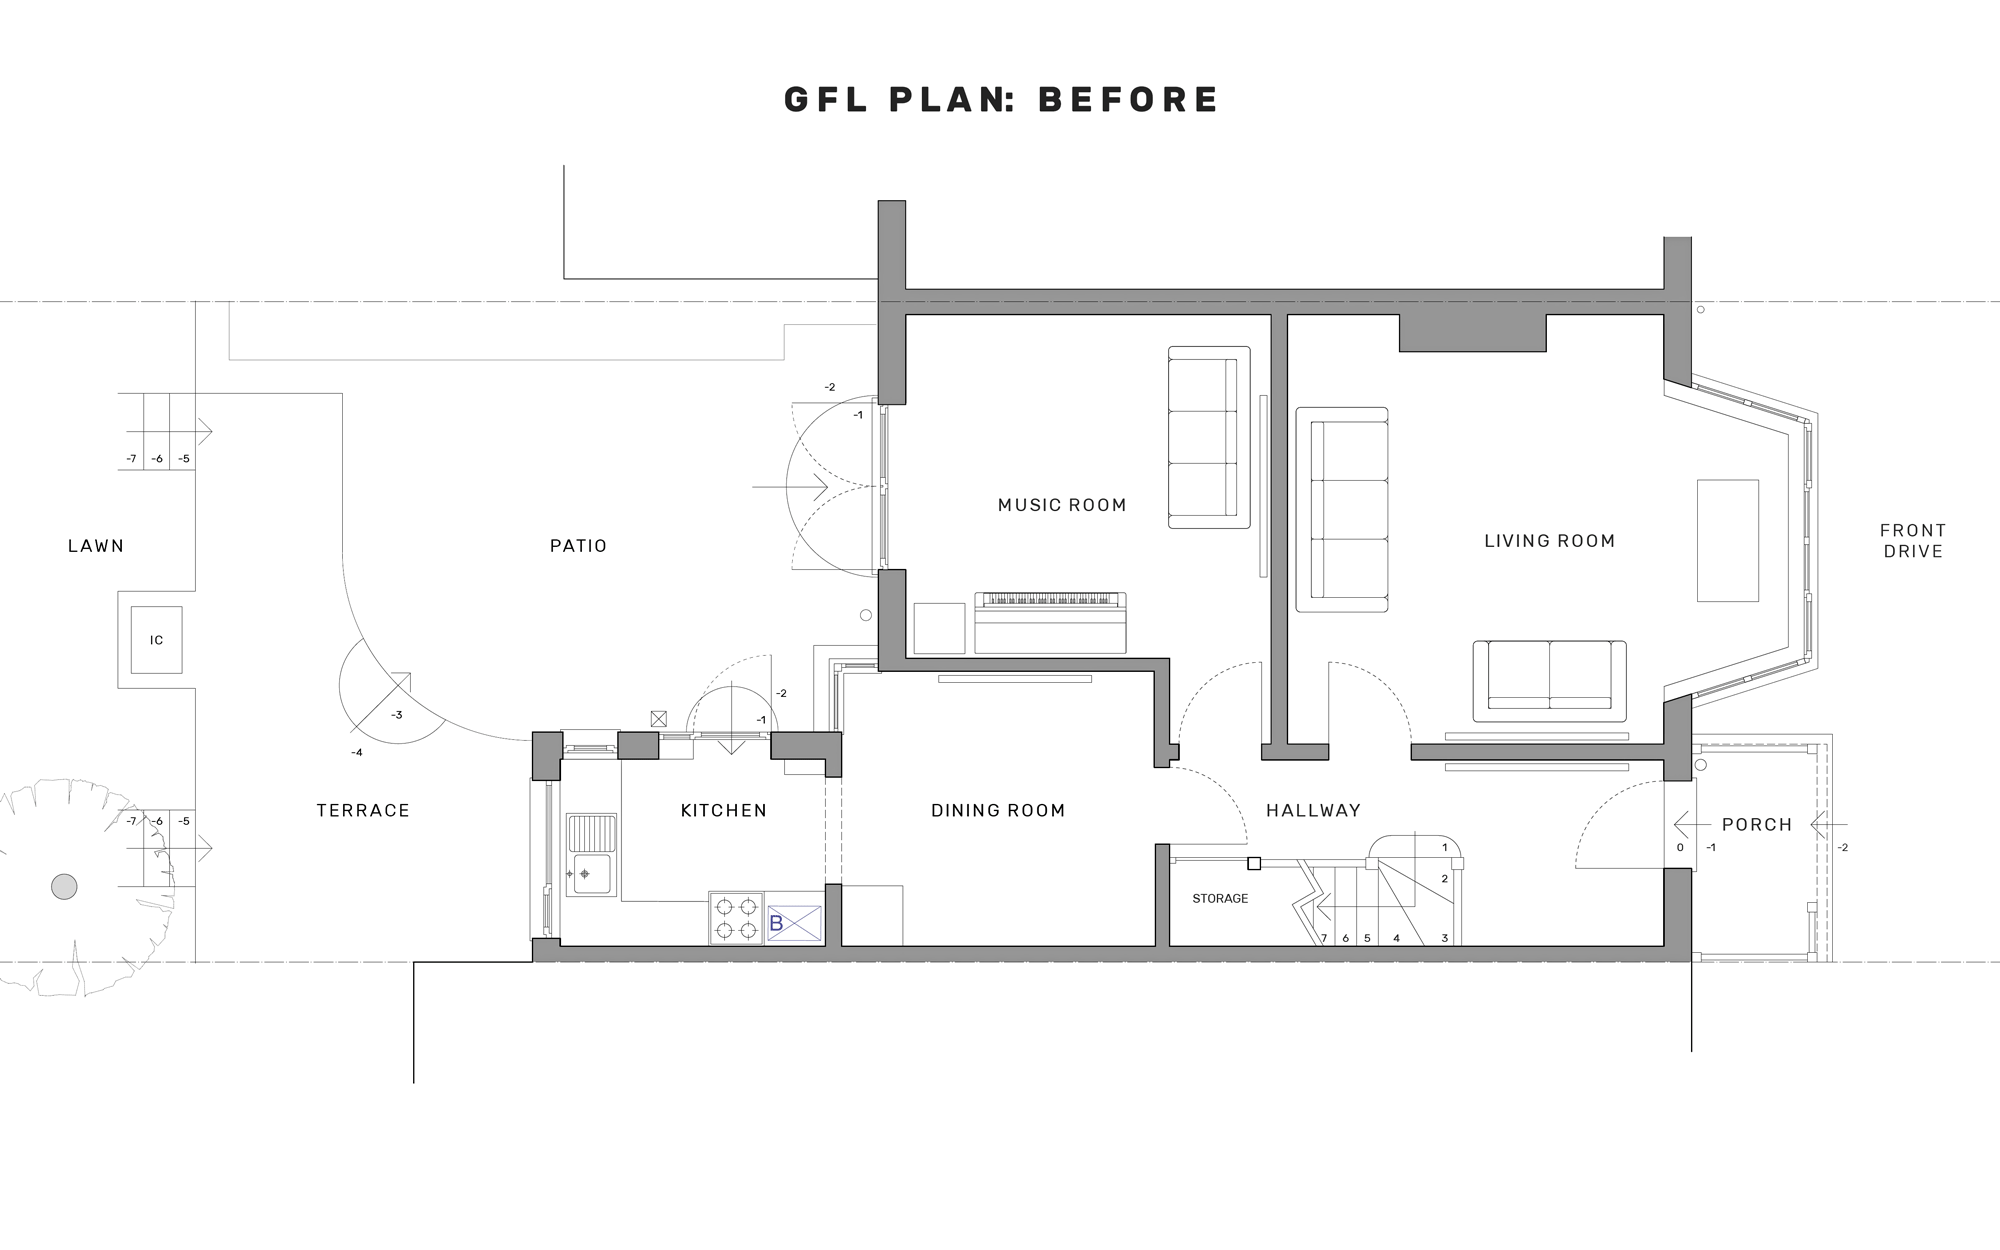 1 to 50 scale floor plan of existing terraced house